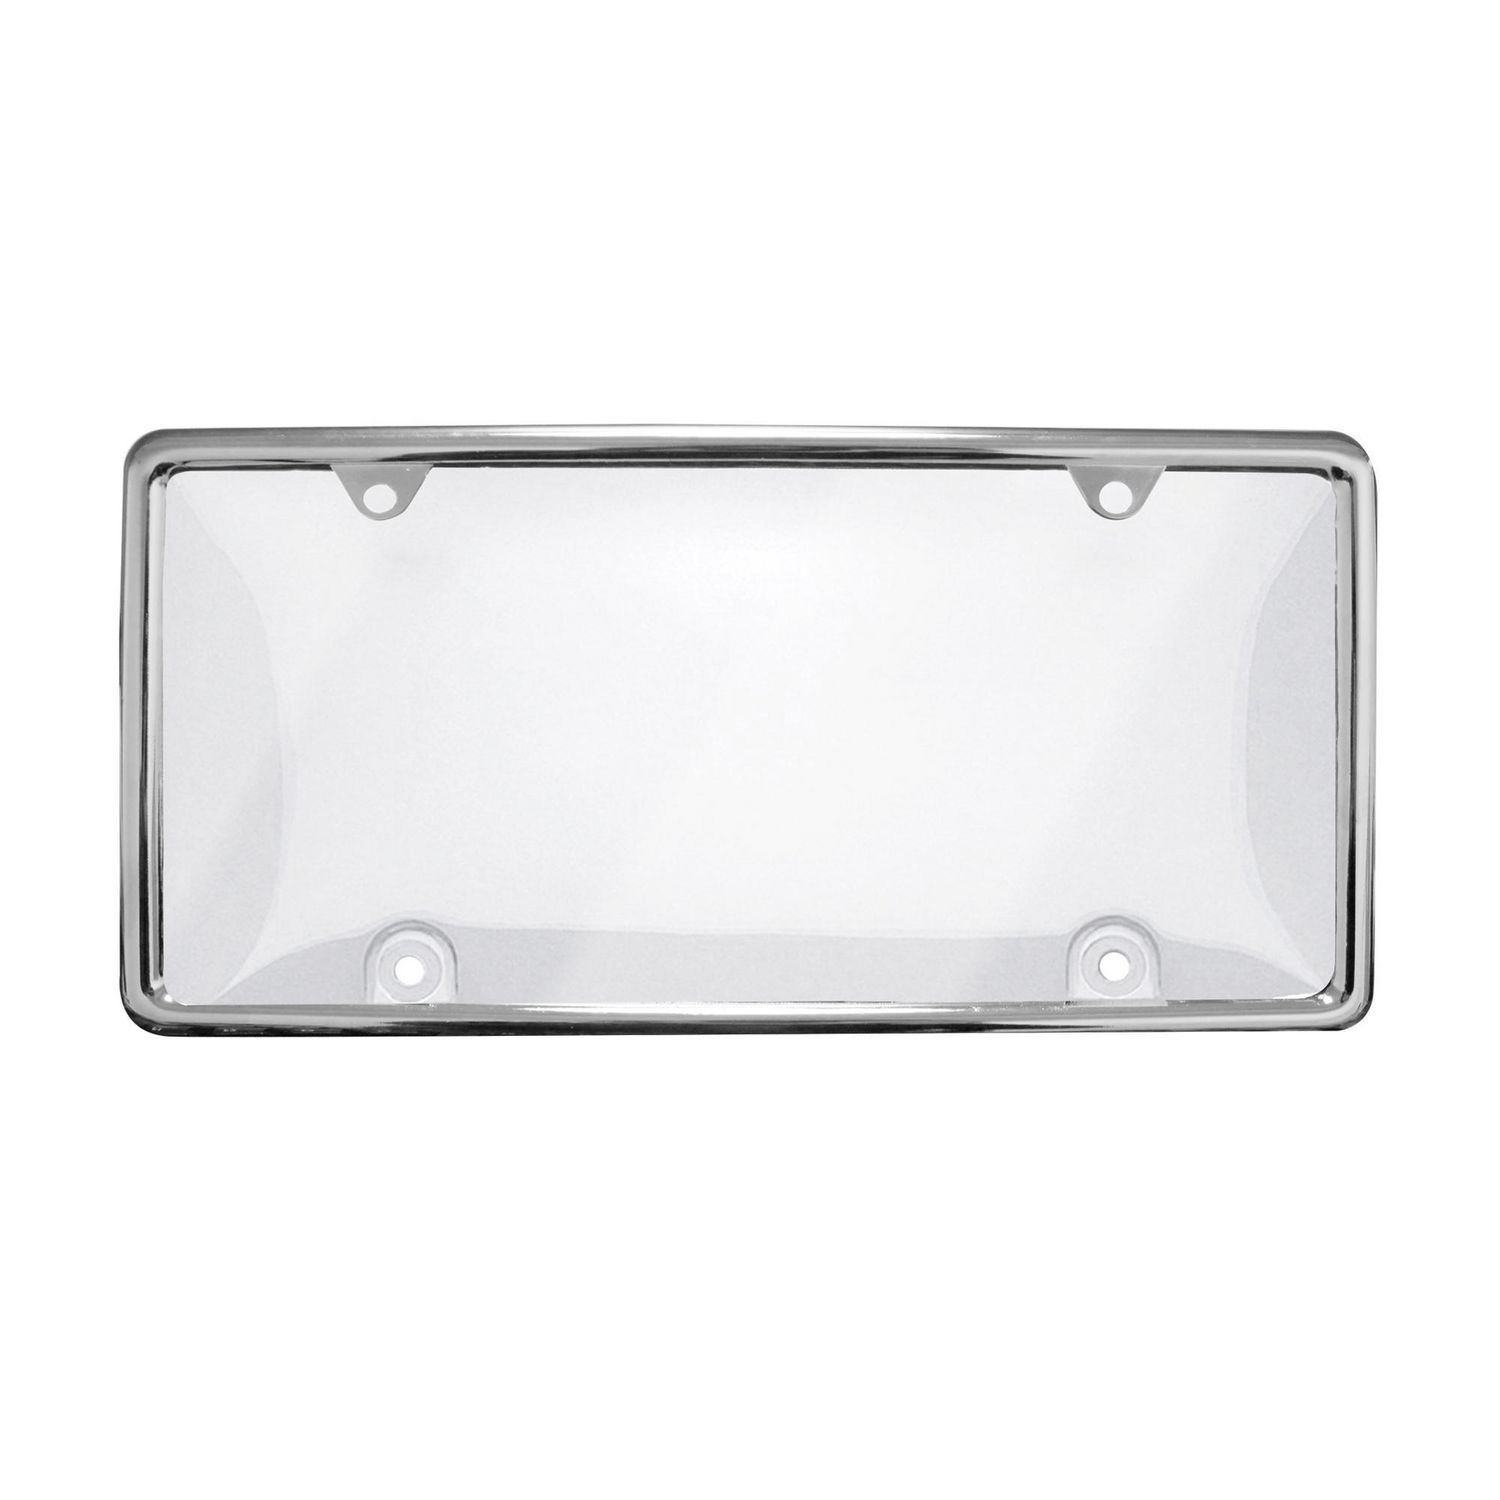 GoOn License Plate Cover with Chrome Frame | Walmart Canada